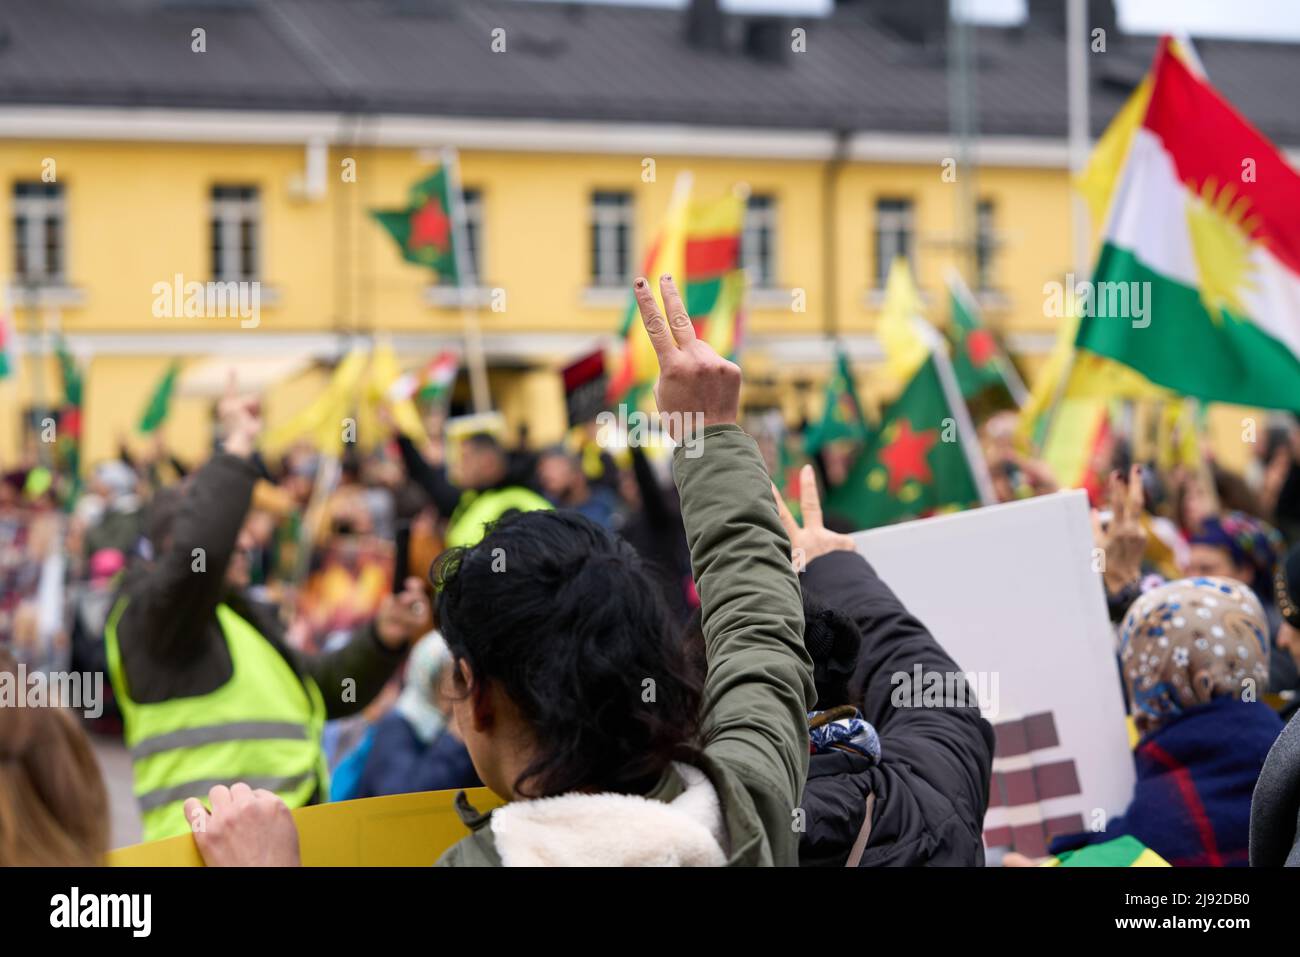 Helsinki, Finland - October 12, 2019: Peaceful rally in downtown Helsinki by the Kurds in Finland against military incursion of Turkey into Northern S Stock Photo